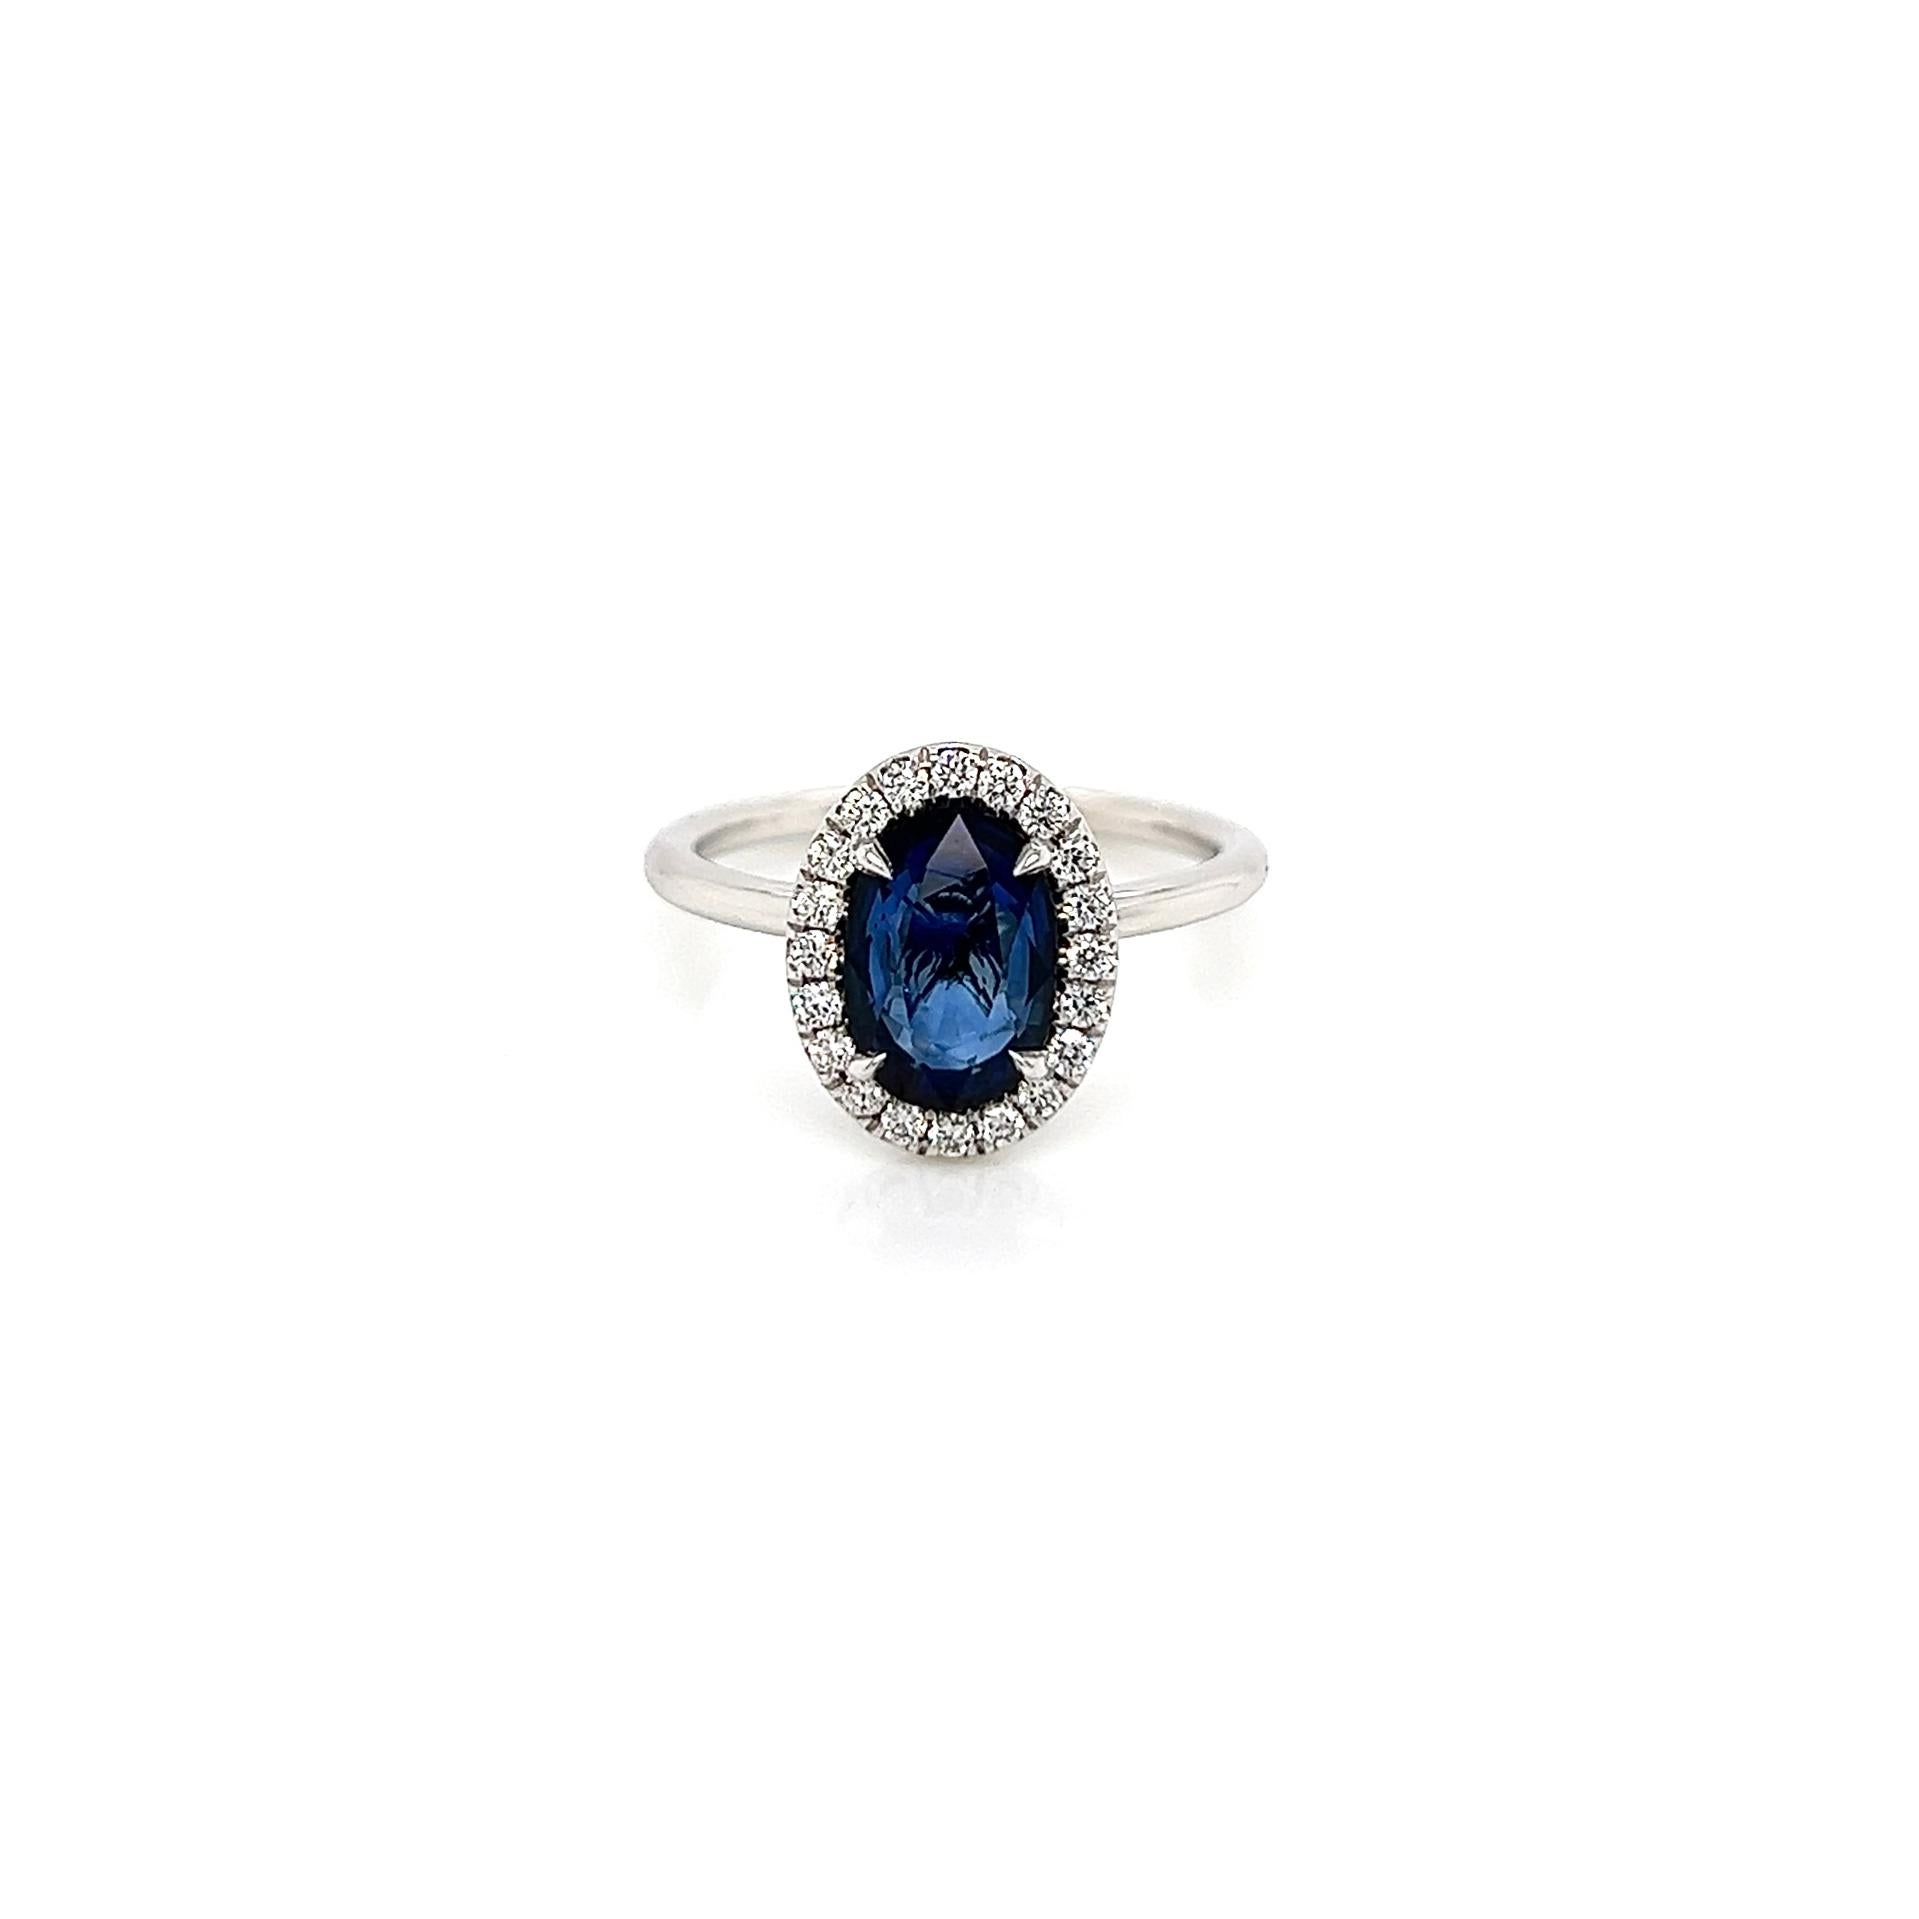 2.15 Total Carat Sapphire Diamond Ladies Ring

-Metal Type: 18K White Gold
-1.85 Carat Oval Shaped Blue Sapphire
-0.30 Carat Round Side Diamonds 
-Size 6.0

Made in New York City.